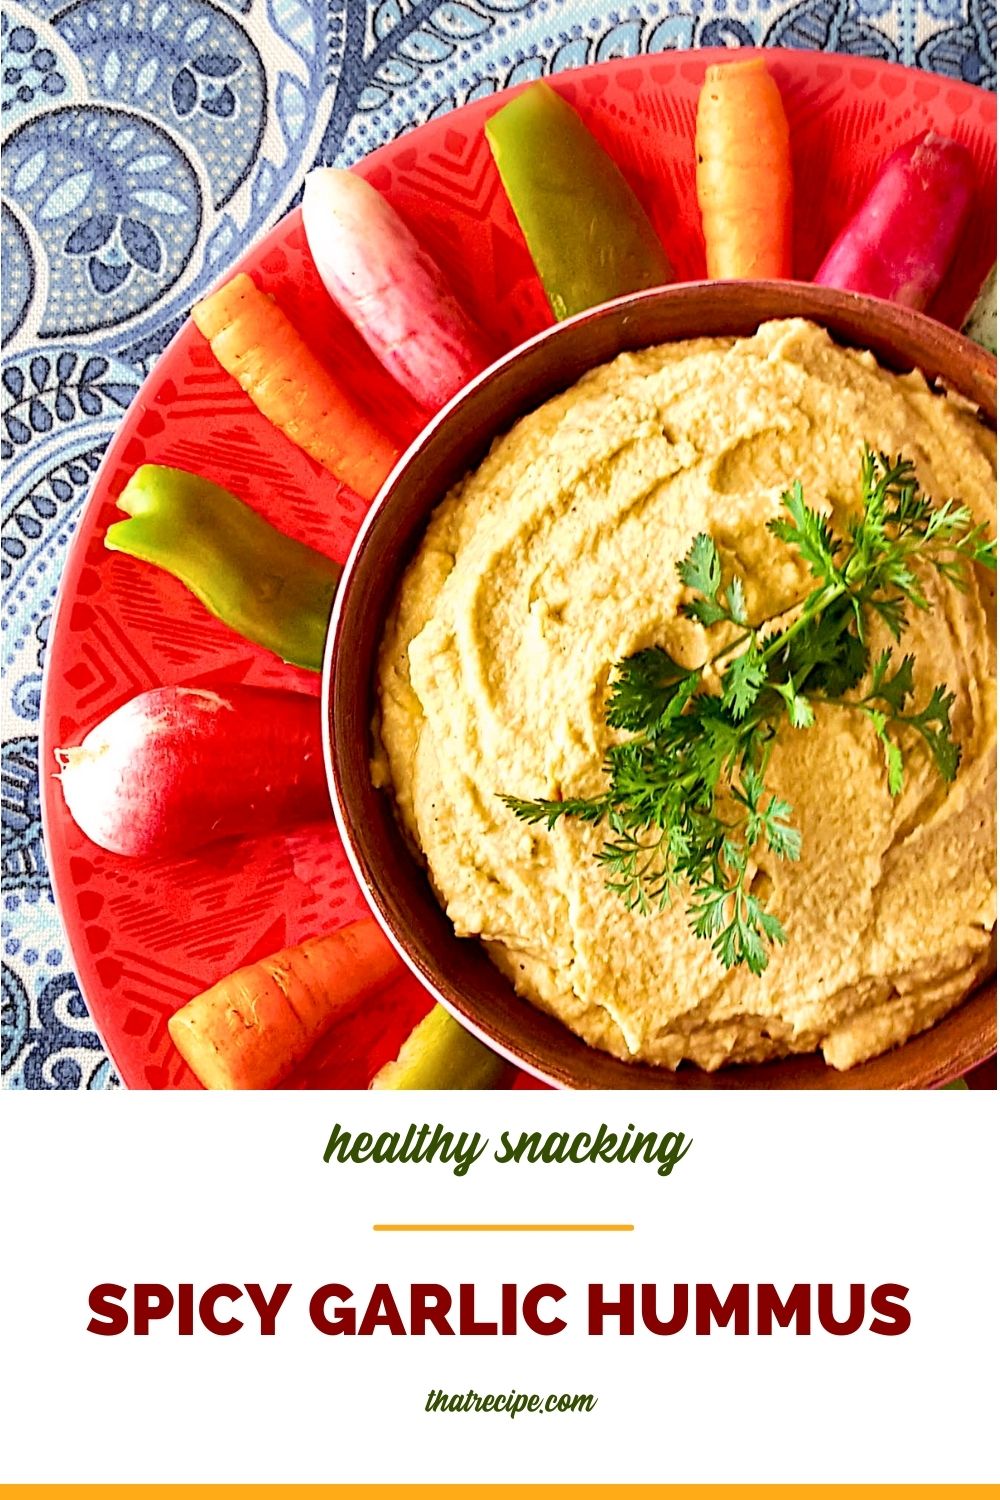 top down view of hummus surrounded by vegetables with text overlay "spicy garlic hummus"